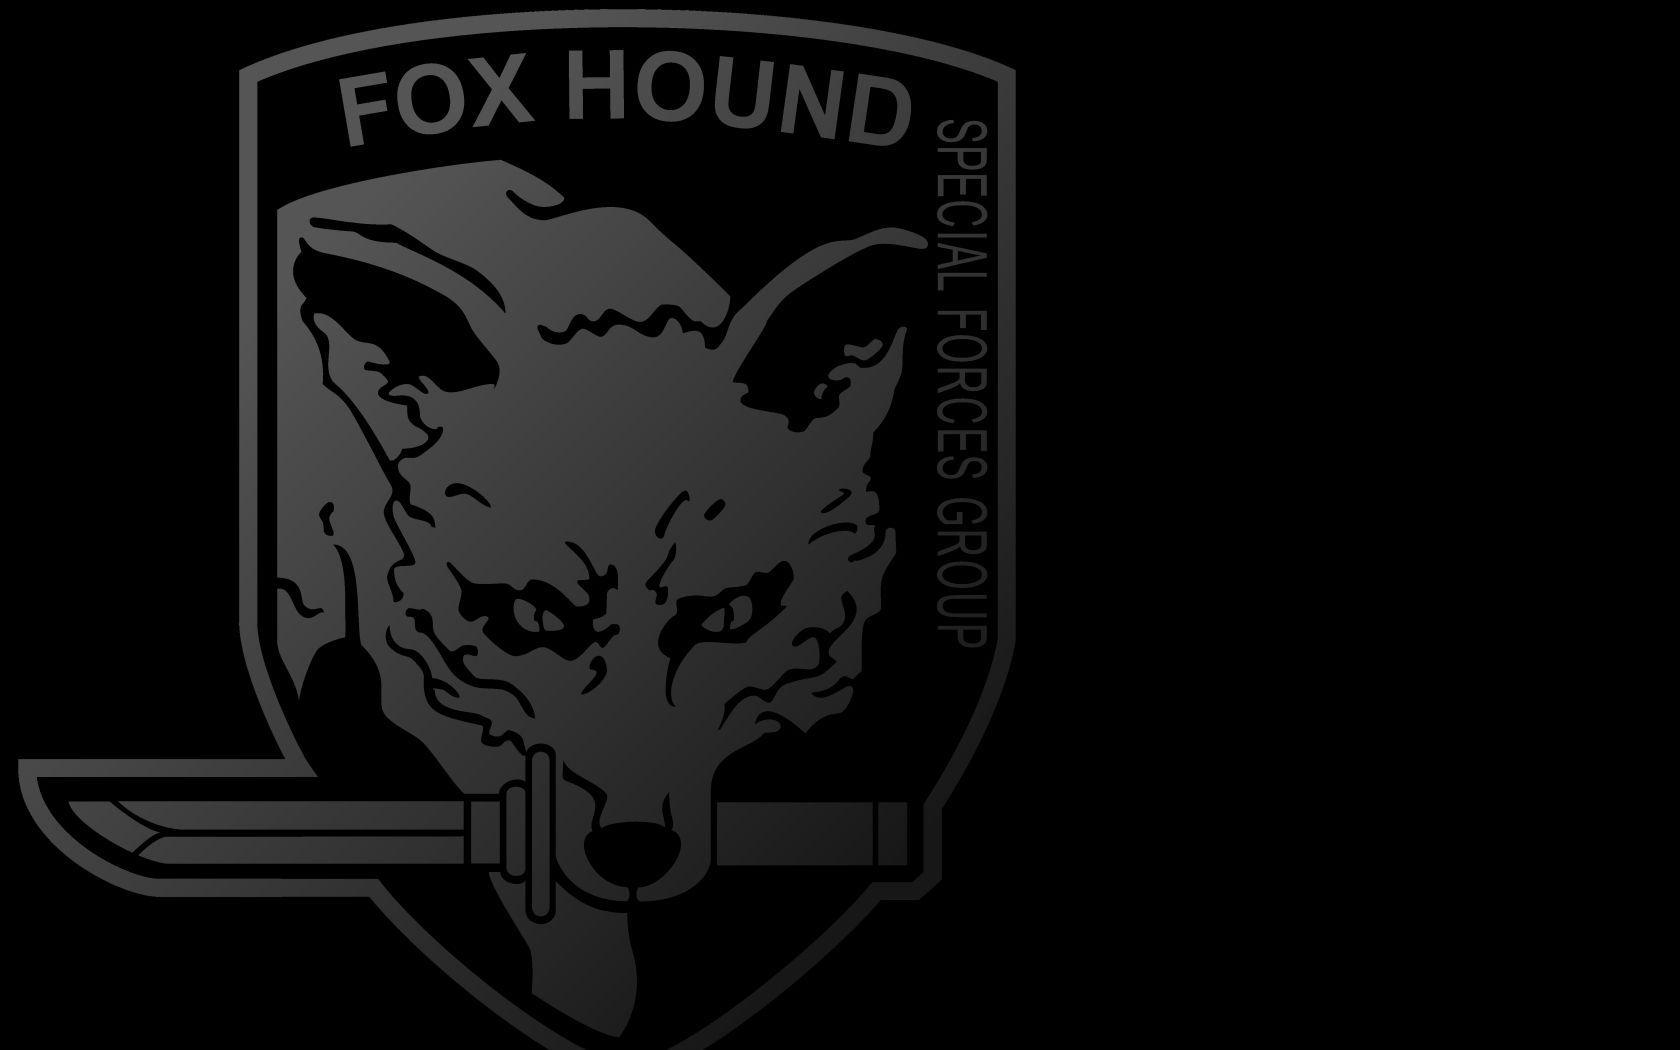 Image For > Foxhound Logo Wallpapers Hd